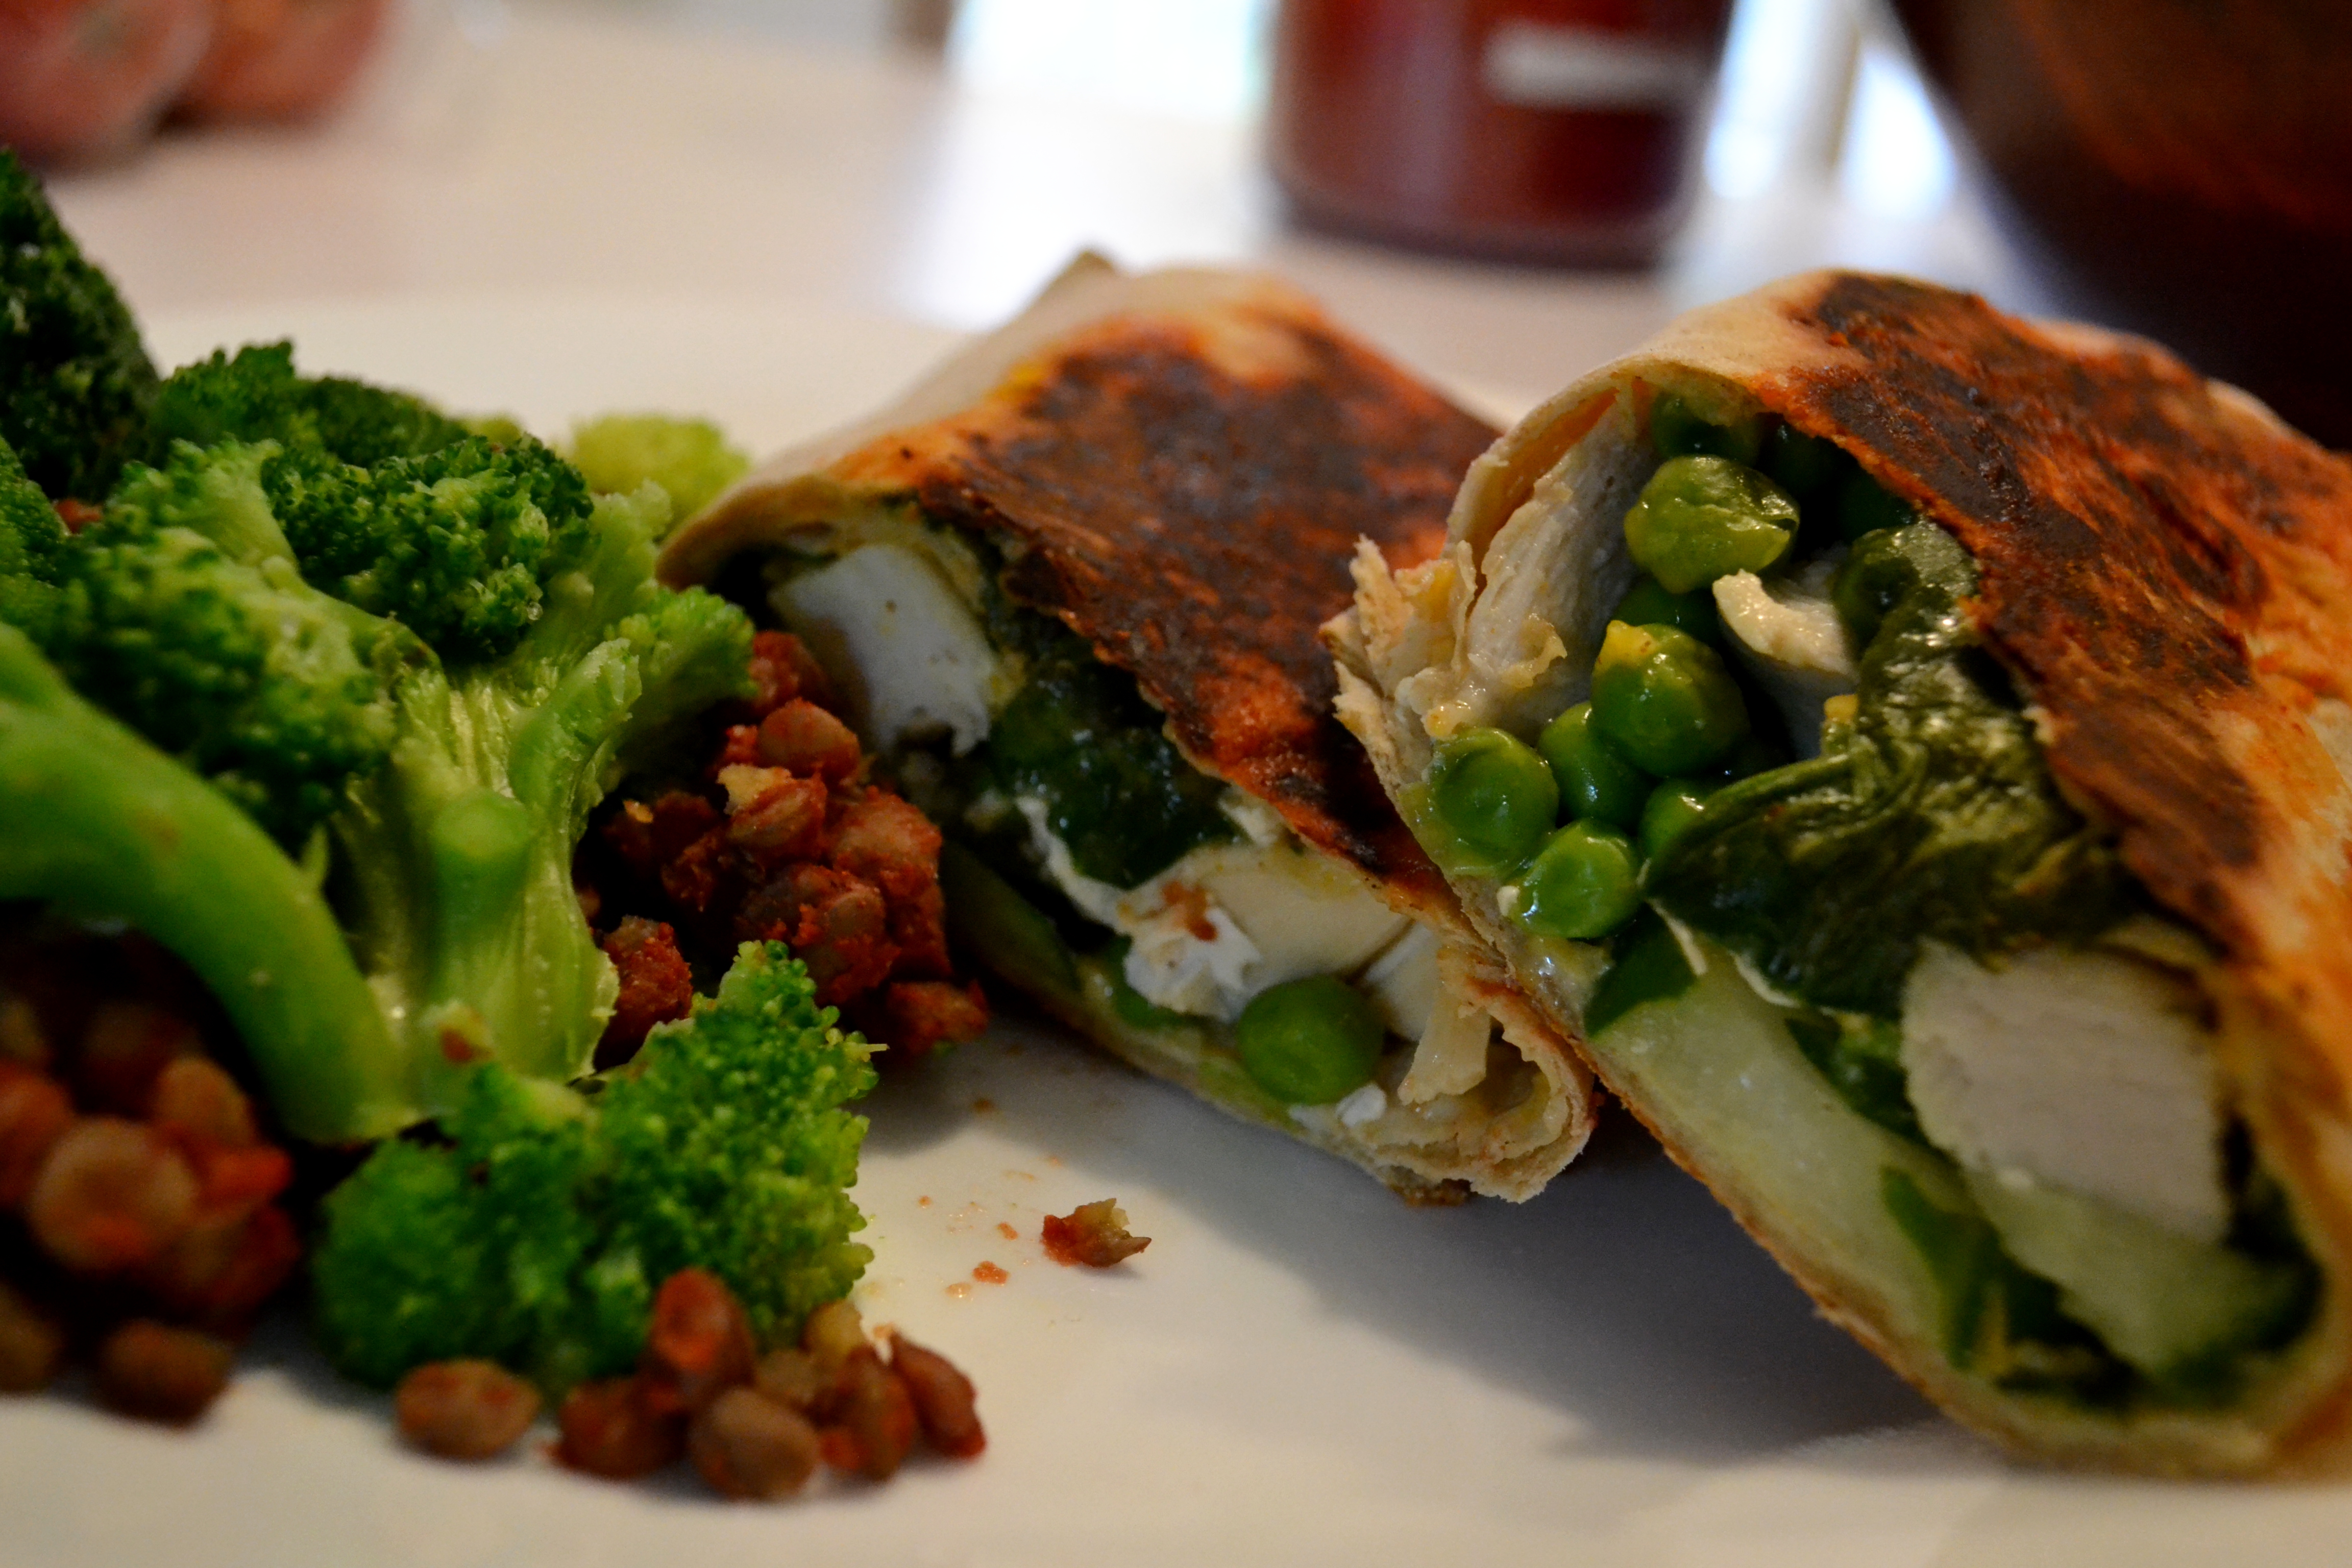 Spinach Chicken Wrap with broccoli and lentils